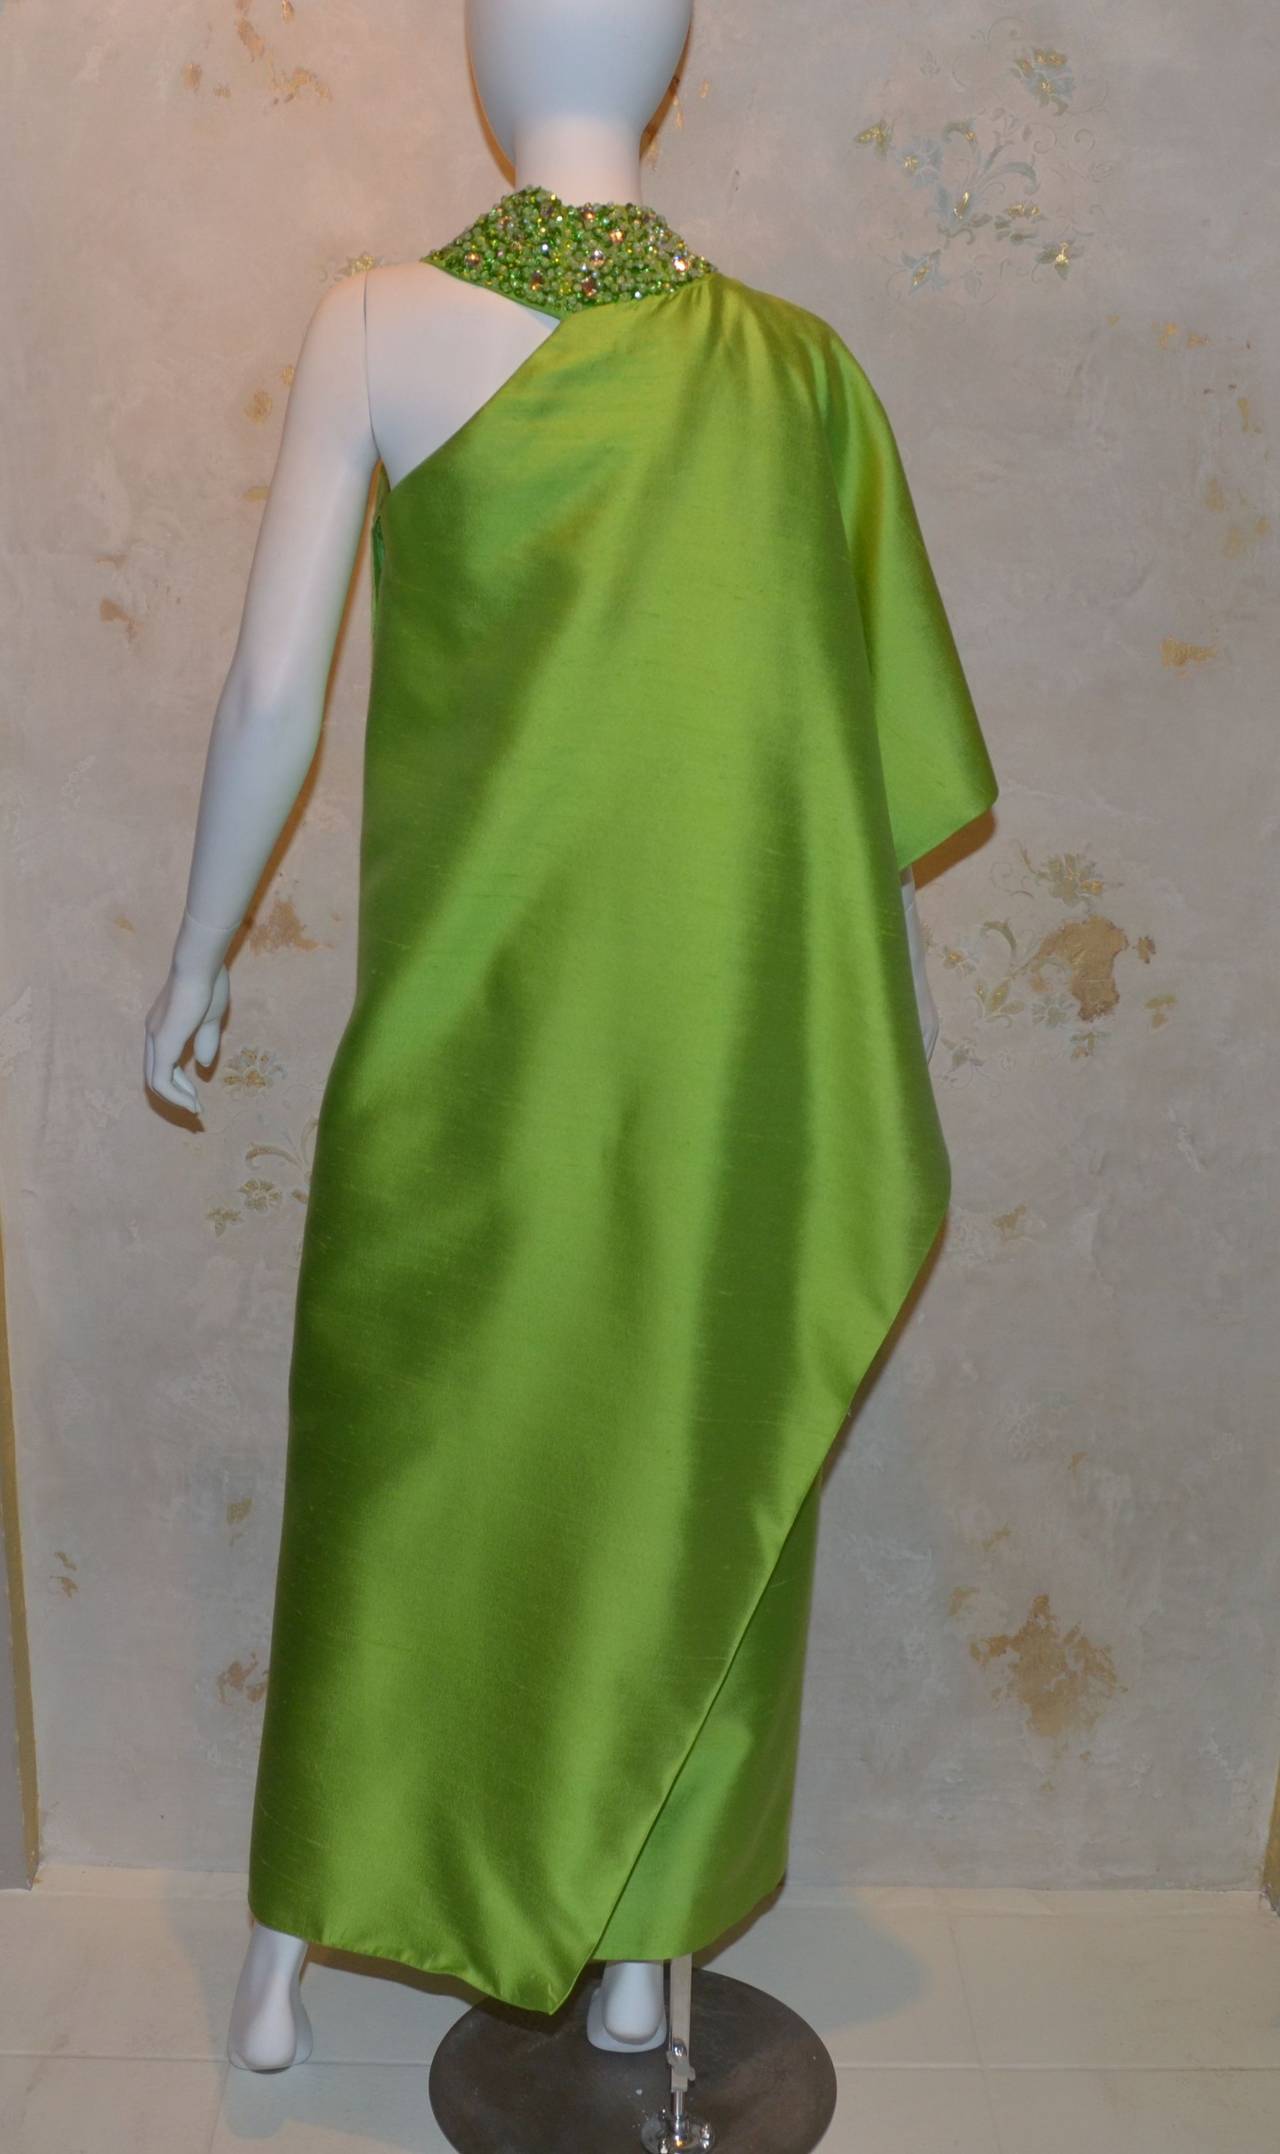 1960s Clifton Wilhide Silk Shantung One Shoulder Gown 
Lime Green structured silk shantung
Draped garment with column gown under and draped shoulder over.
Slit up center
Approximate size 4-6
Heavily beaded collar
2  layer garment with 2 hand